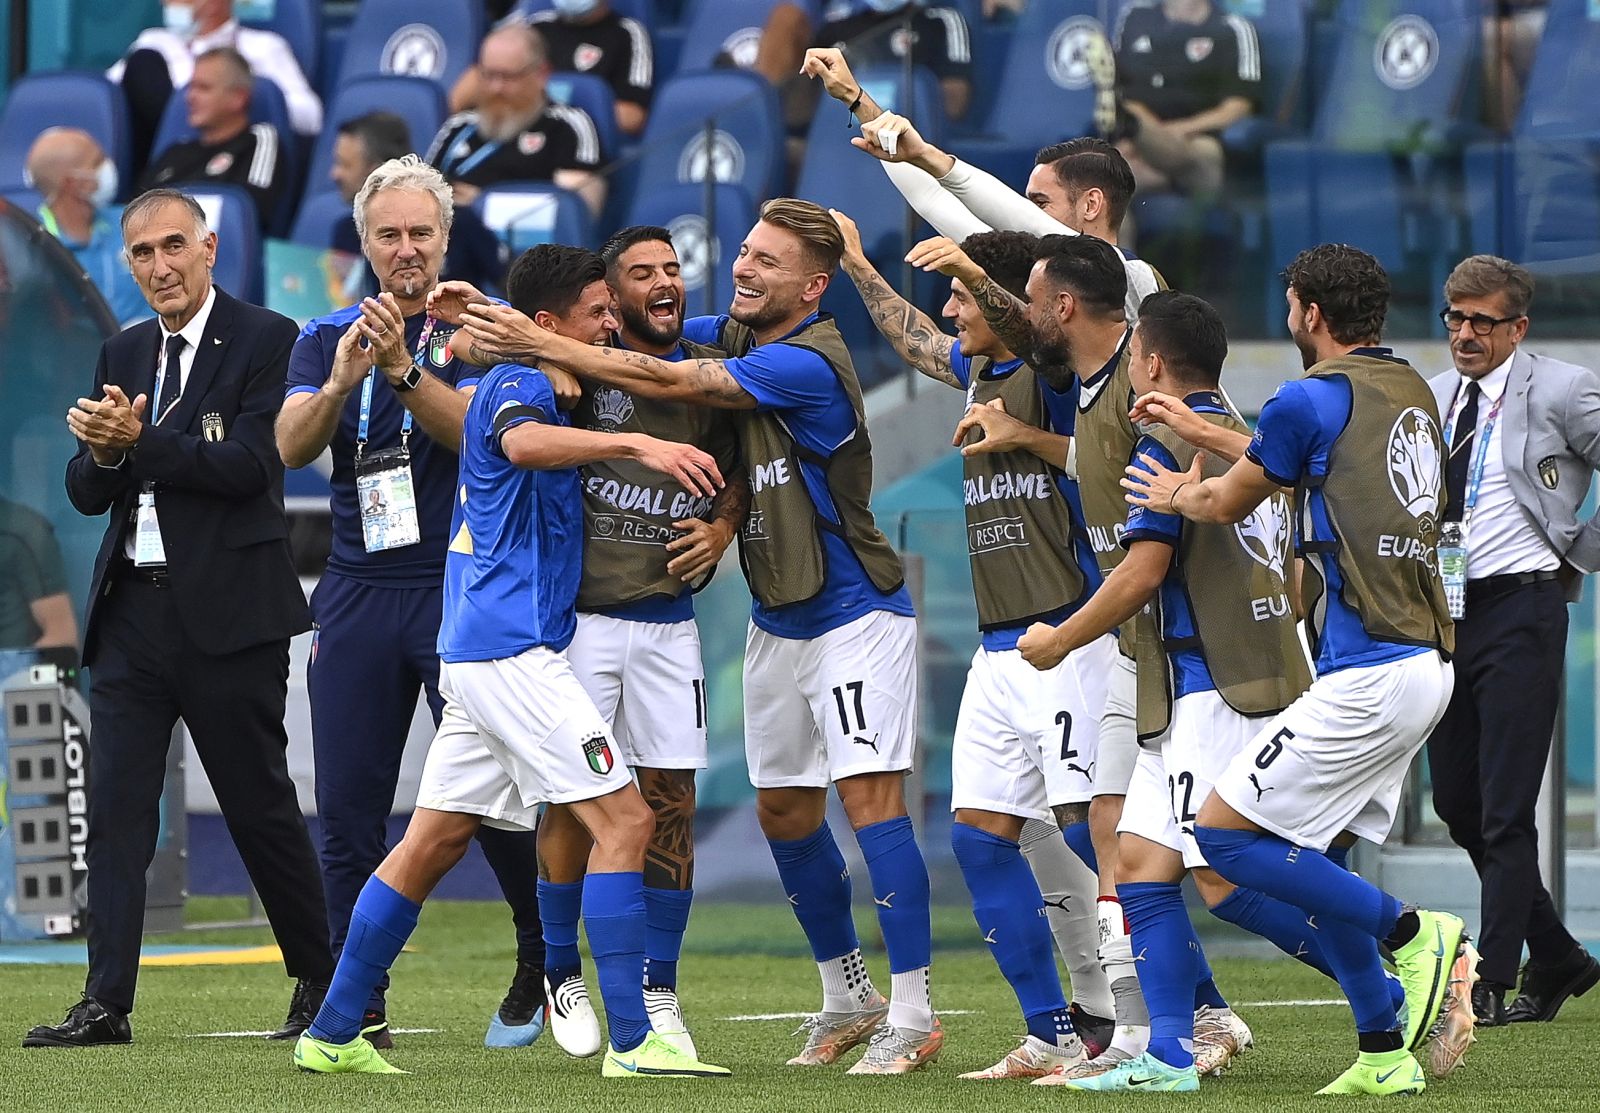 epa09288892 Matteo Pessina (3-L) of Italy celebrates with teammates after scoring the 1-0 lead during the UEFA EURO 2020 group A preliminary round soccer match between Italy and Wales in Rome, Italy, 20 June 2021.  EPA/Riccardo Antimiani / POOL (RESTRICTIONS: For editorial news reporting purposes only. Images must appear as still images and must not emulate match action video footage. Photographs published in online publications shall have an interval of at least 20 seconds between the posting.)